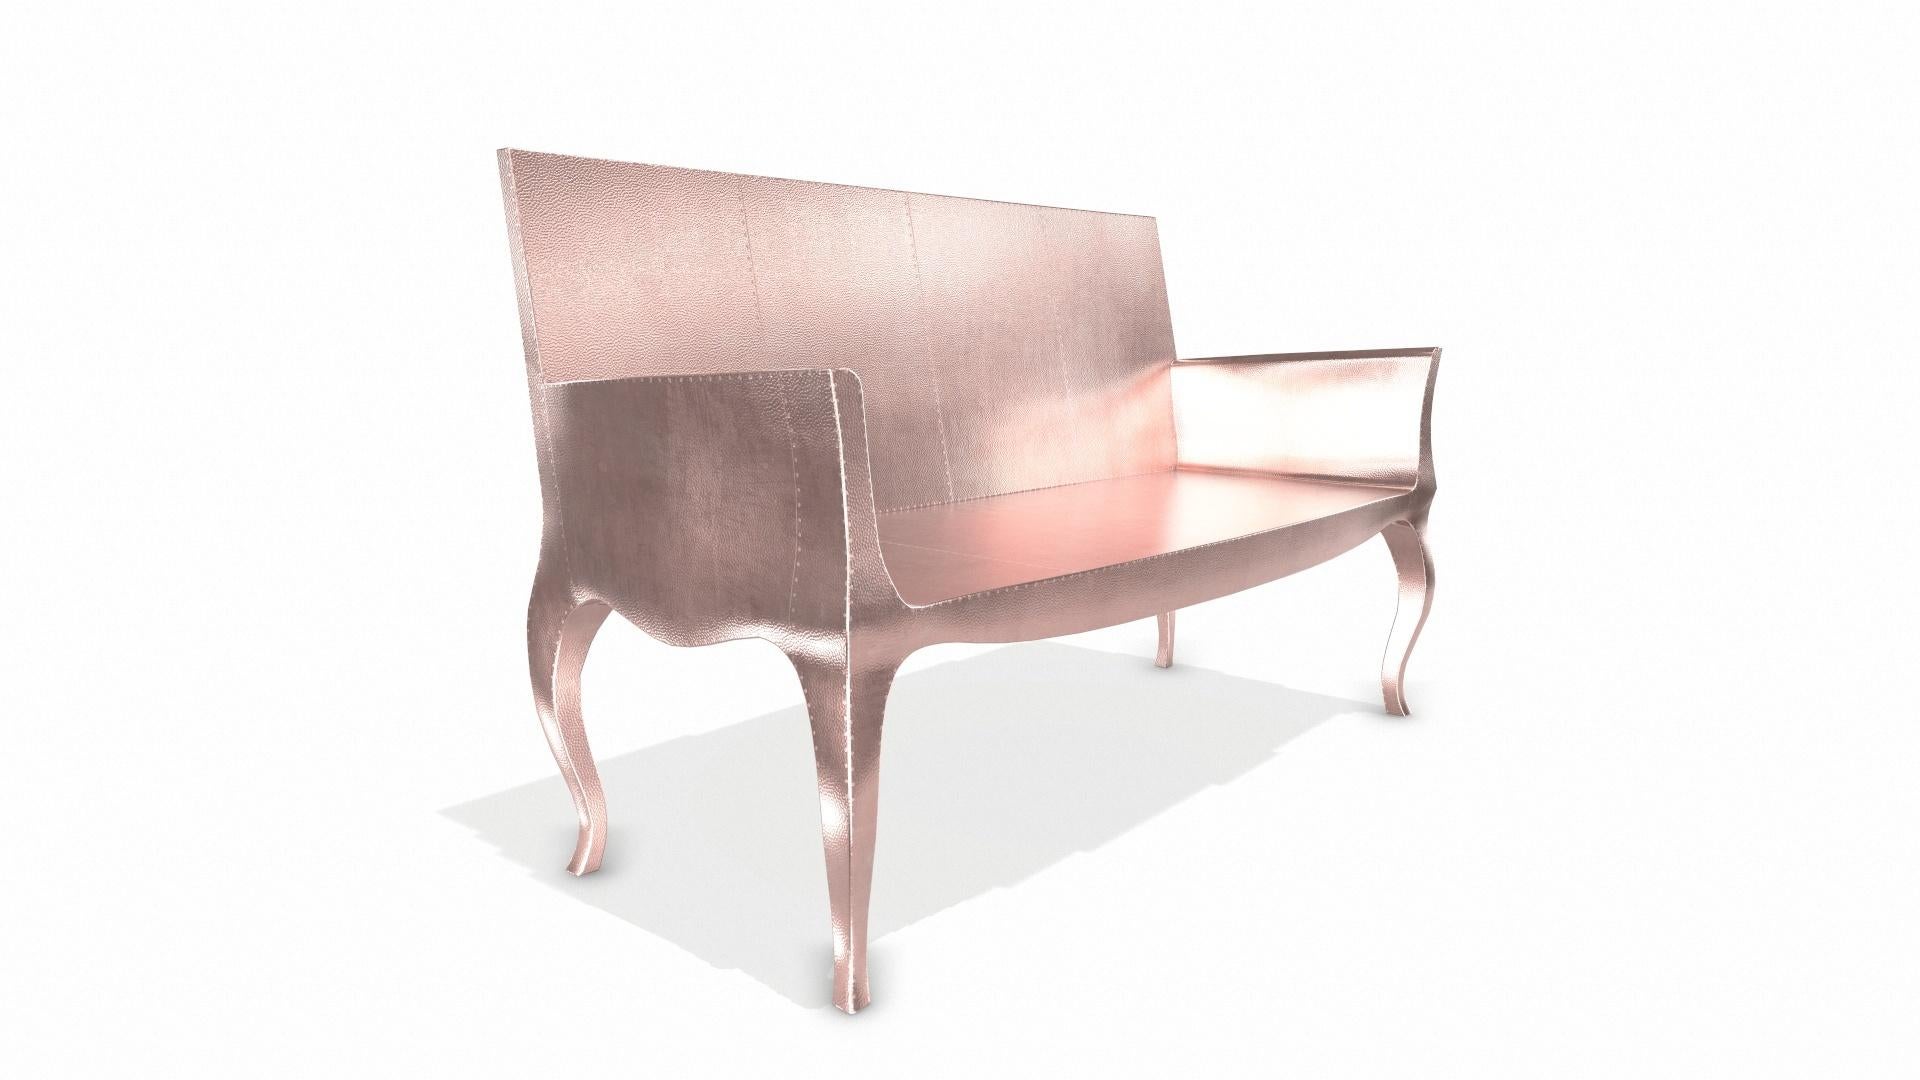 Louise Settee Art Deco Canapes in Mid. Hammered Copper by Paul Mathieu In New Condition For Sale In New York, NY